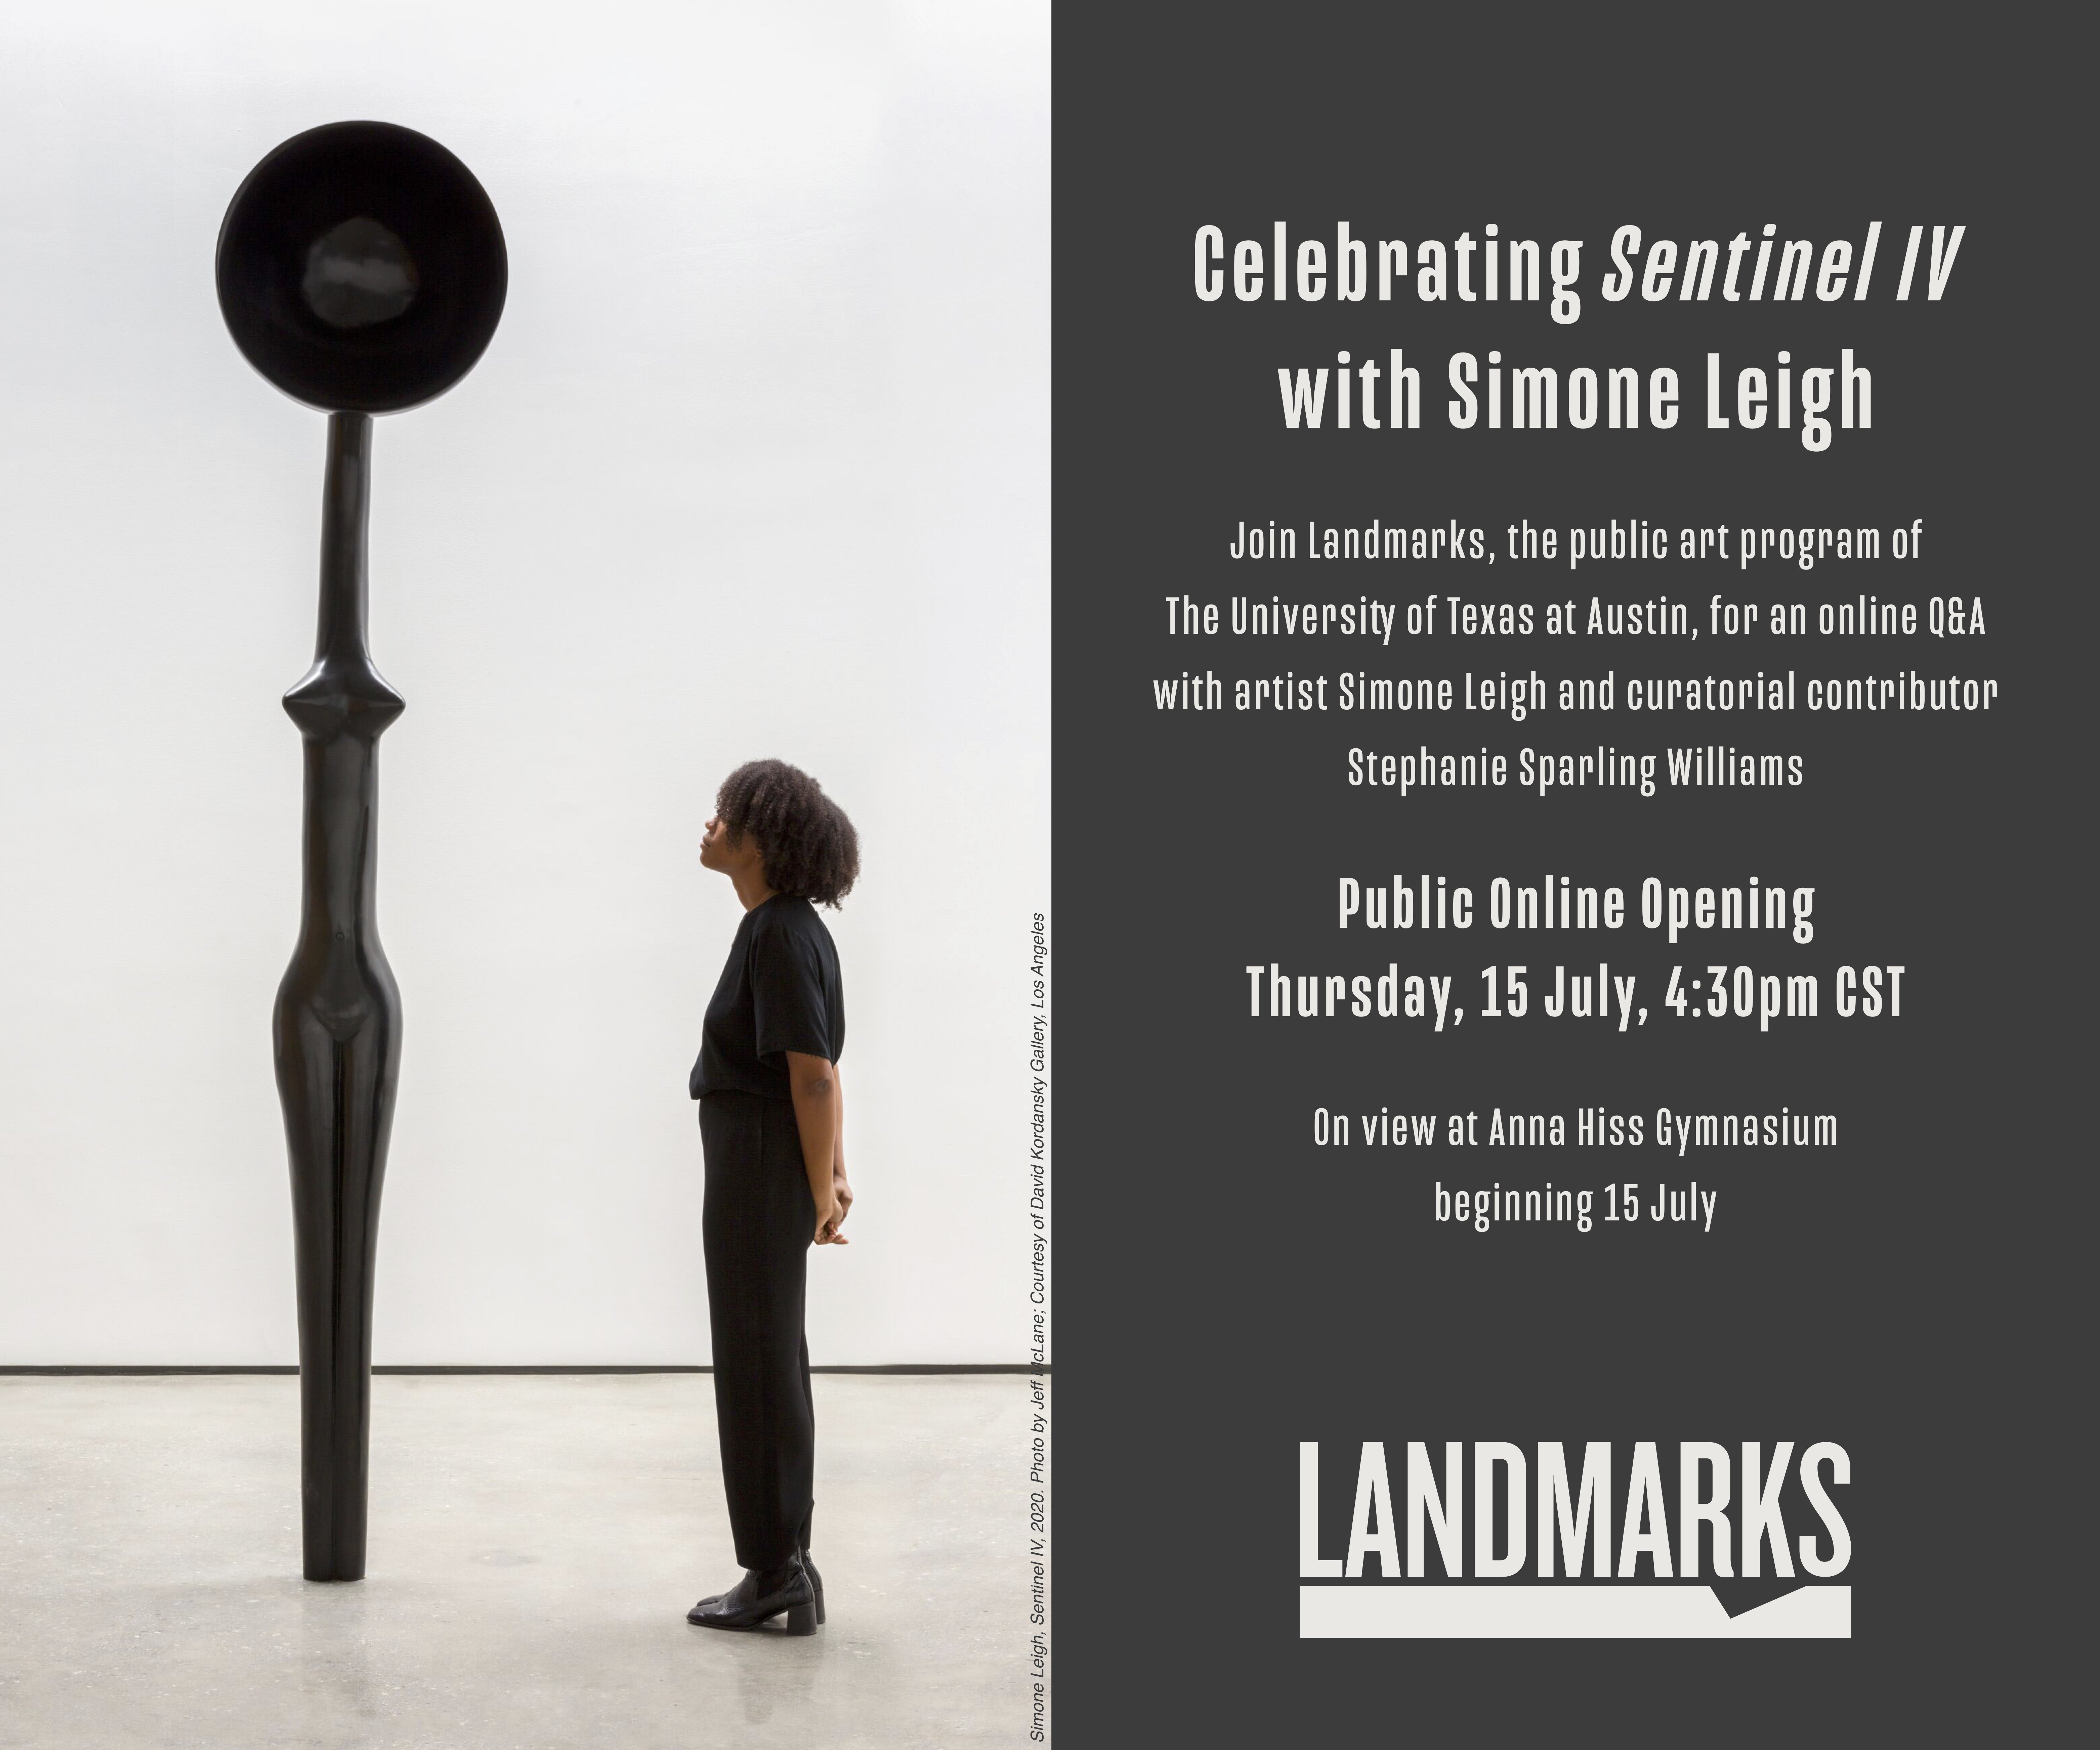 A graphic with an image of Simone Leigh's sculpture "Sentinel IV" on the left and a grey vertical bar on the right with event details